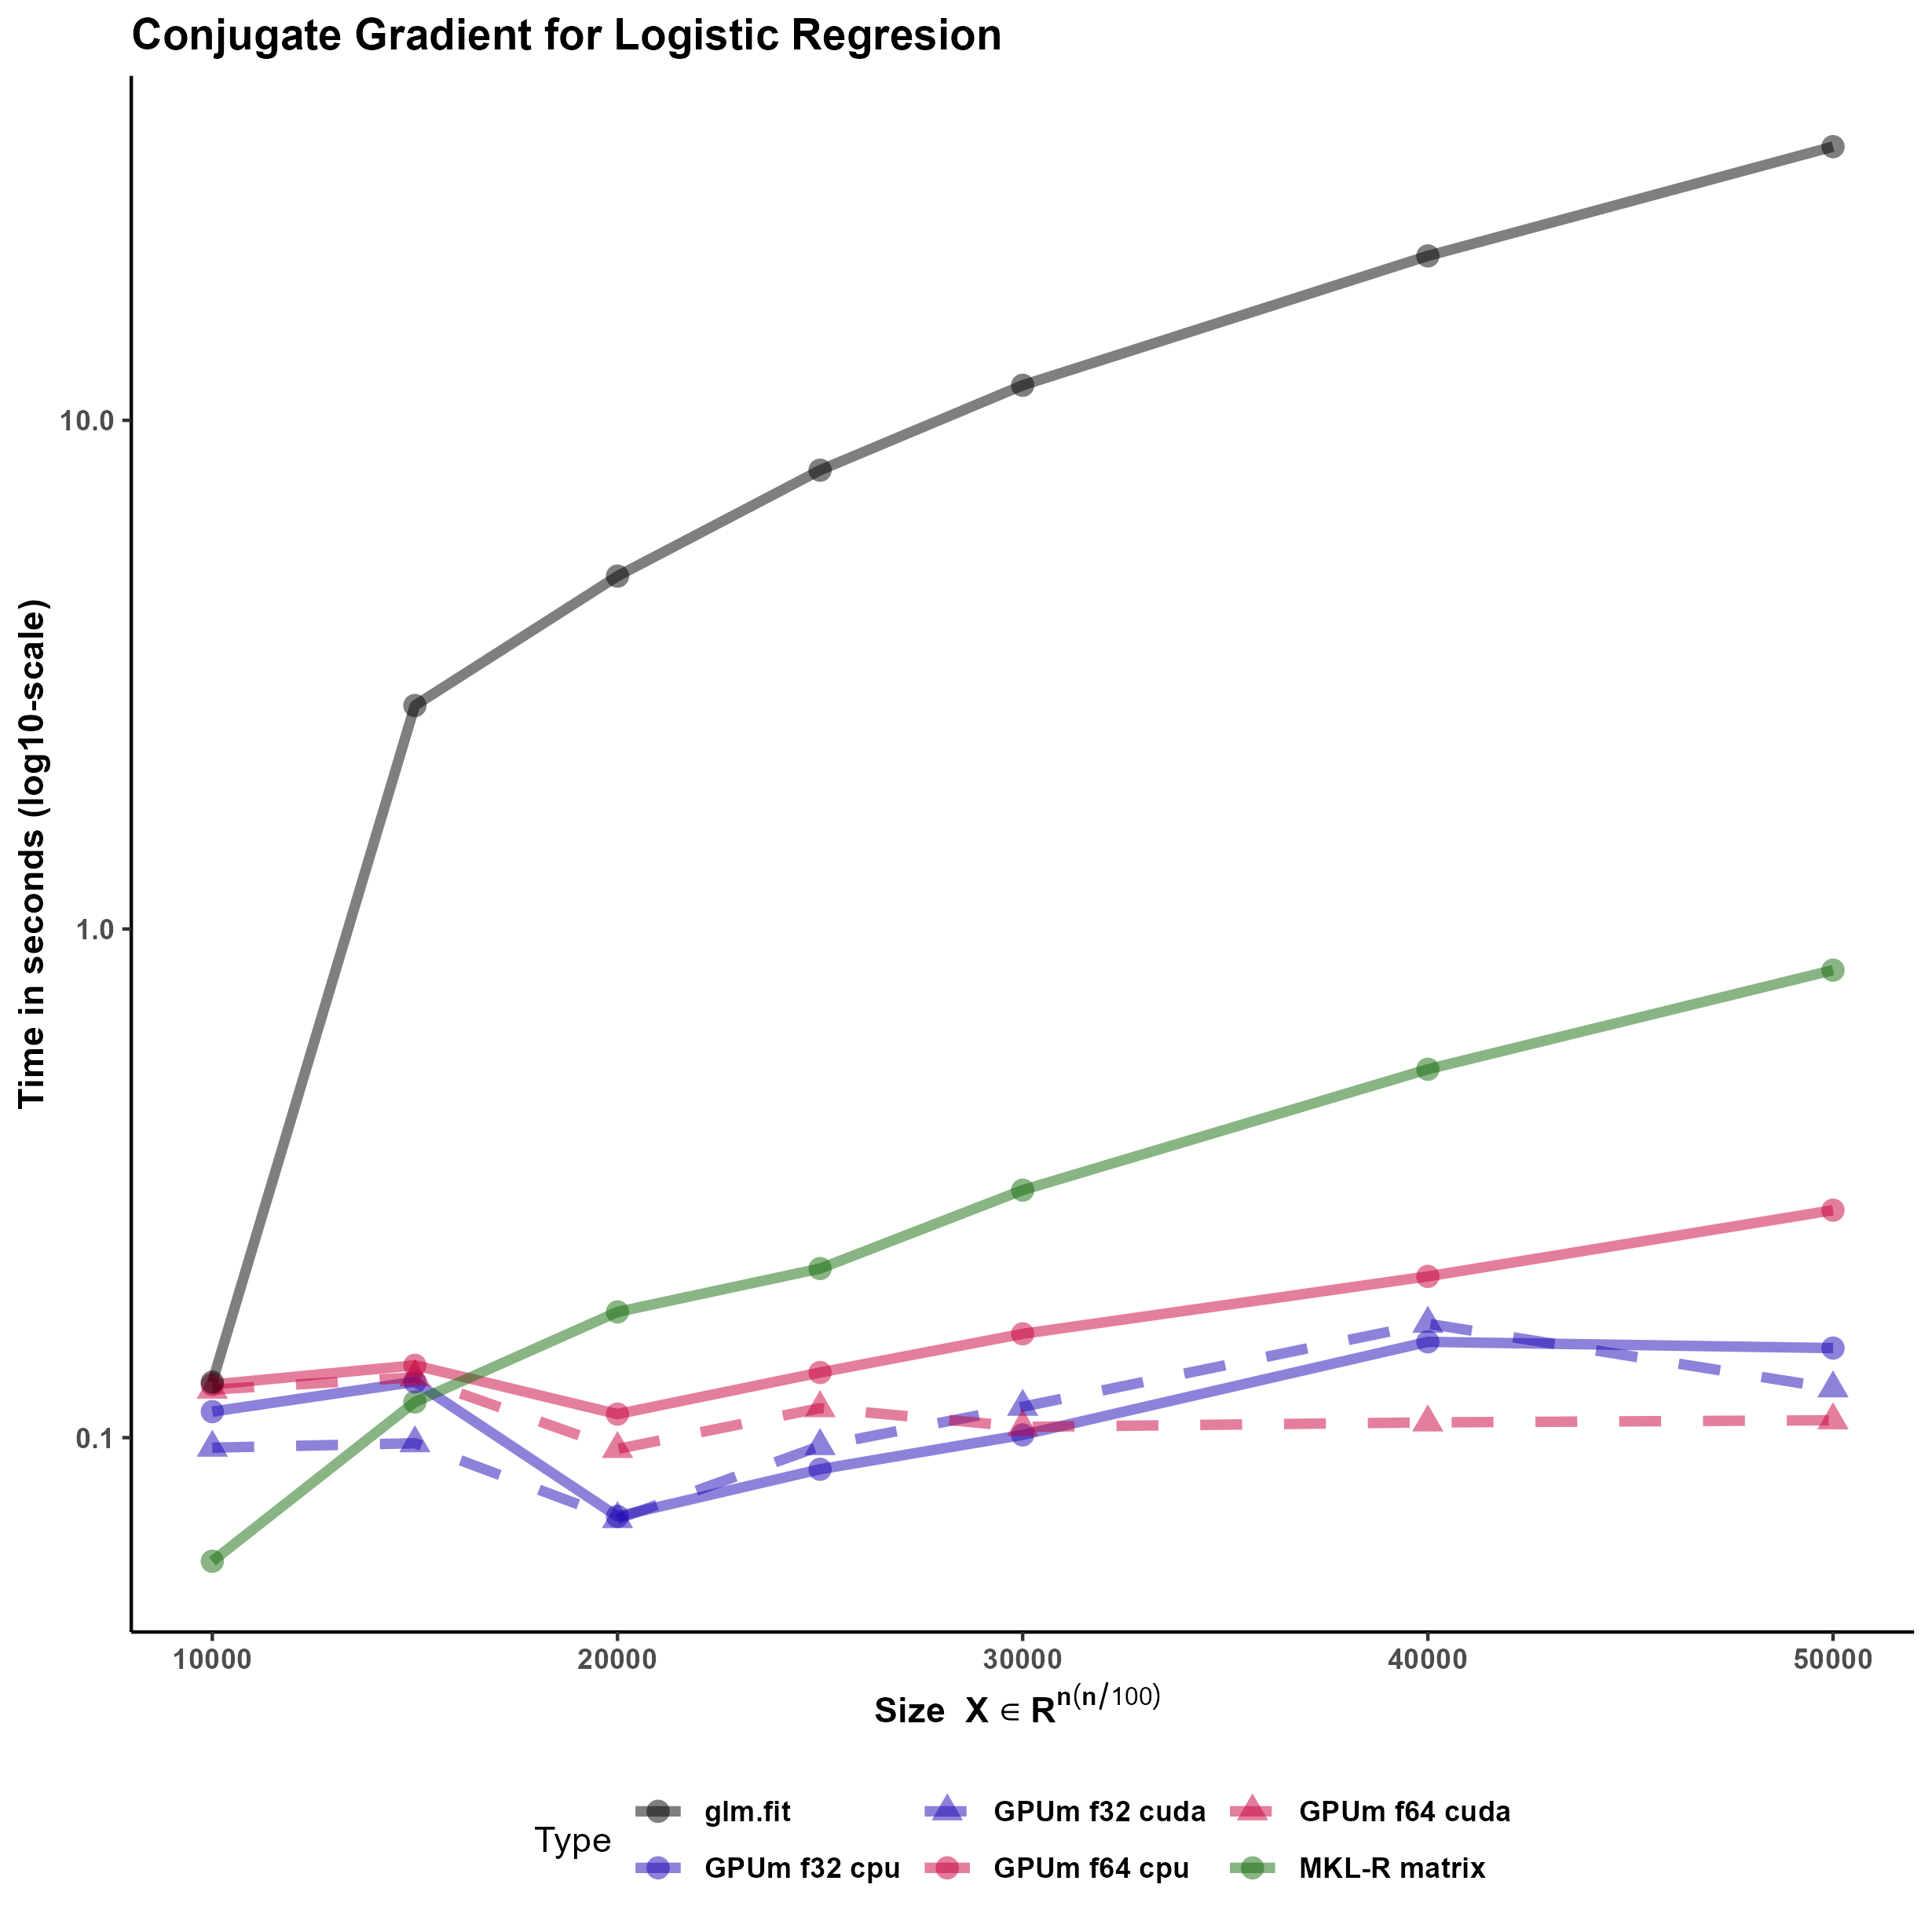 Figure 4: Computation time (in seconds) of the logistic regression using the conjugate gradient method for MKL-R (i.e. R with the optimized MKL BLAS library, solid green), solid lines for CPU, dashed lines for GPU with CUDA, pink lines for GPUmatrix with float64, and blue lines for GPUmatrix with float32. Time shown in y-axis is in logarithmic scale. The calculations are performed on random matrices whose size are n x (n/100). Therefore, the leftmost part of the graph shows the computing time for a 10,000 x 100 matrix and the rightmost part a 50,000 x 500 matrix.